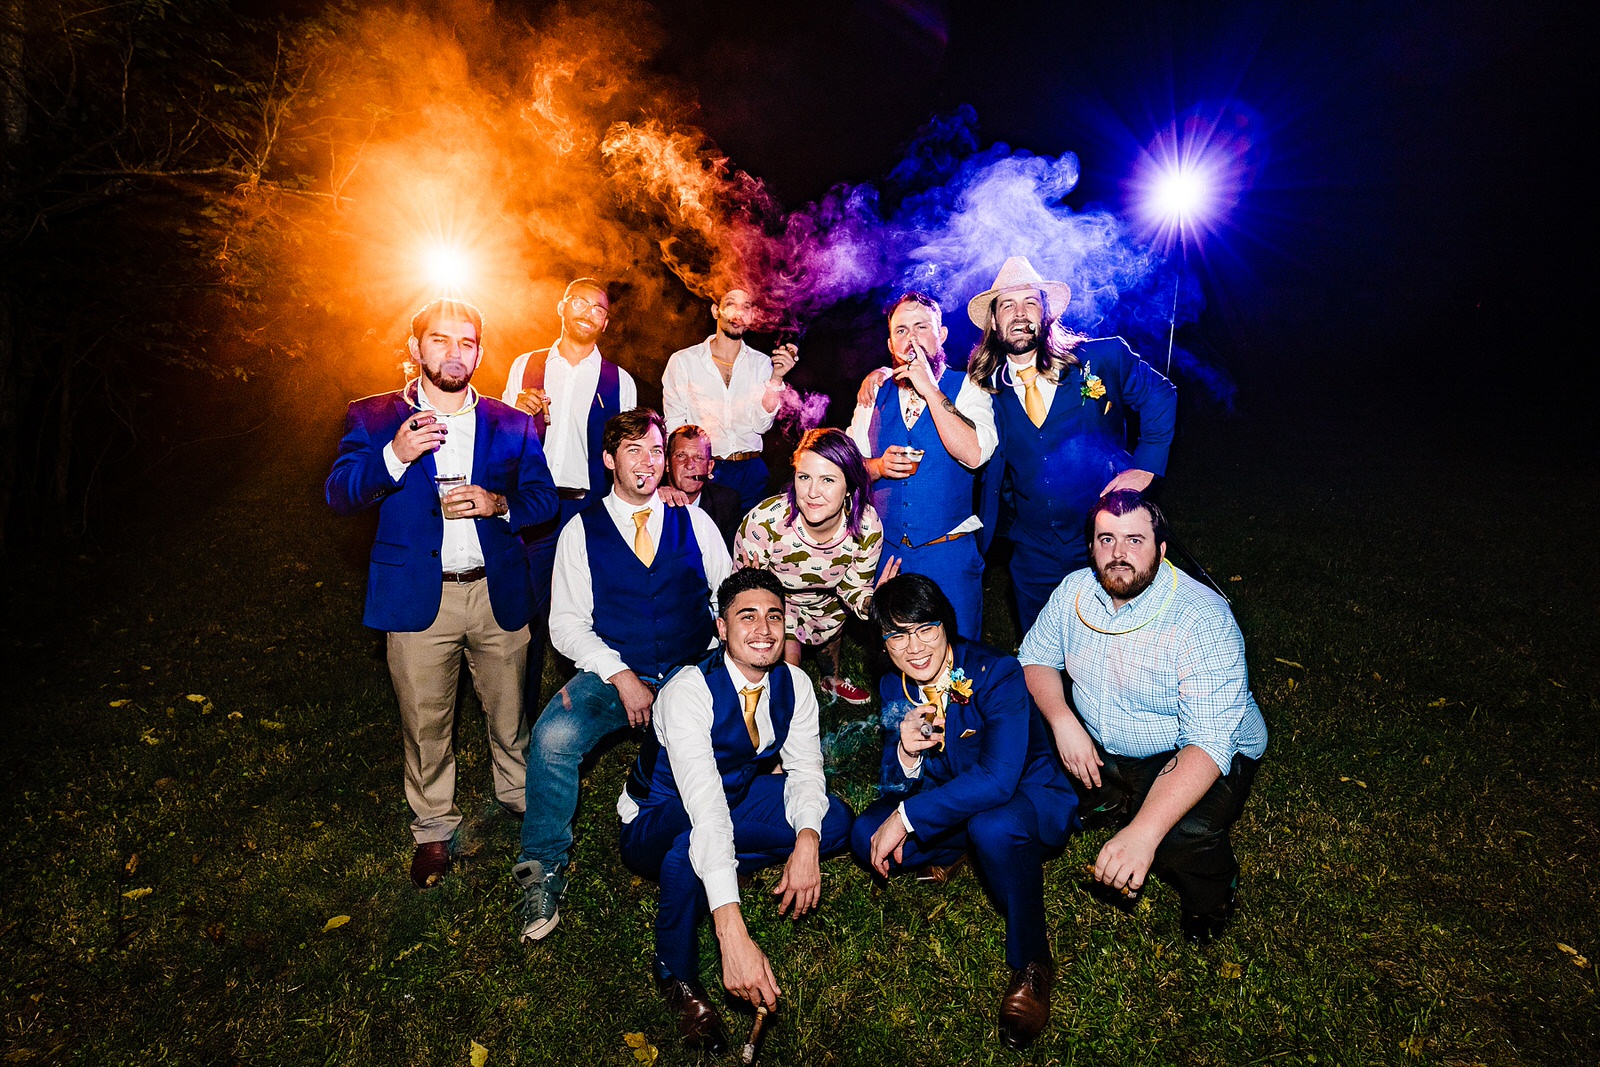 Groom and his friends enjoy a cigar at the wedding reception